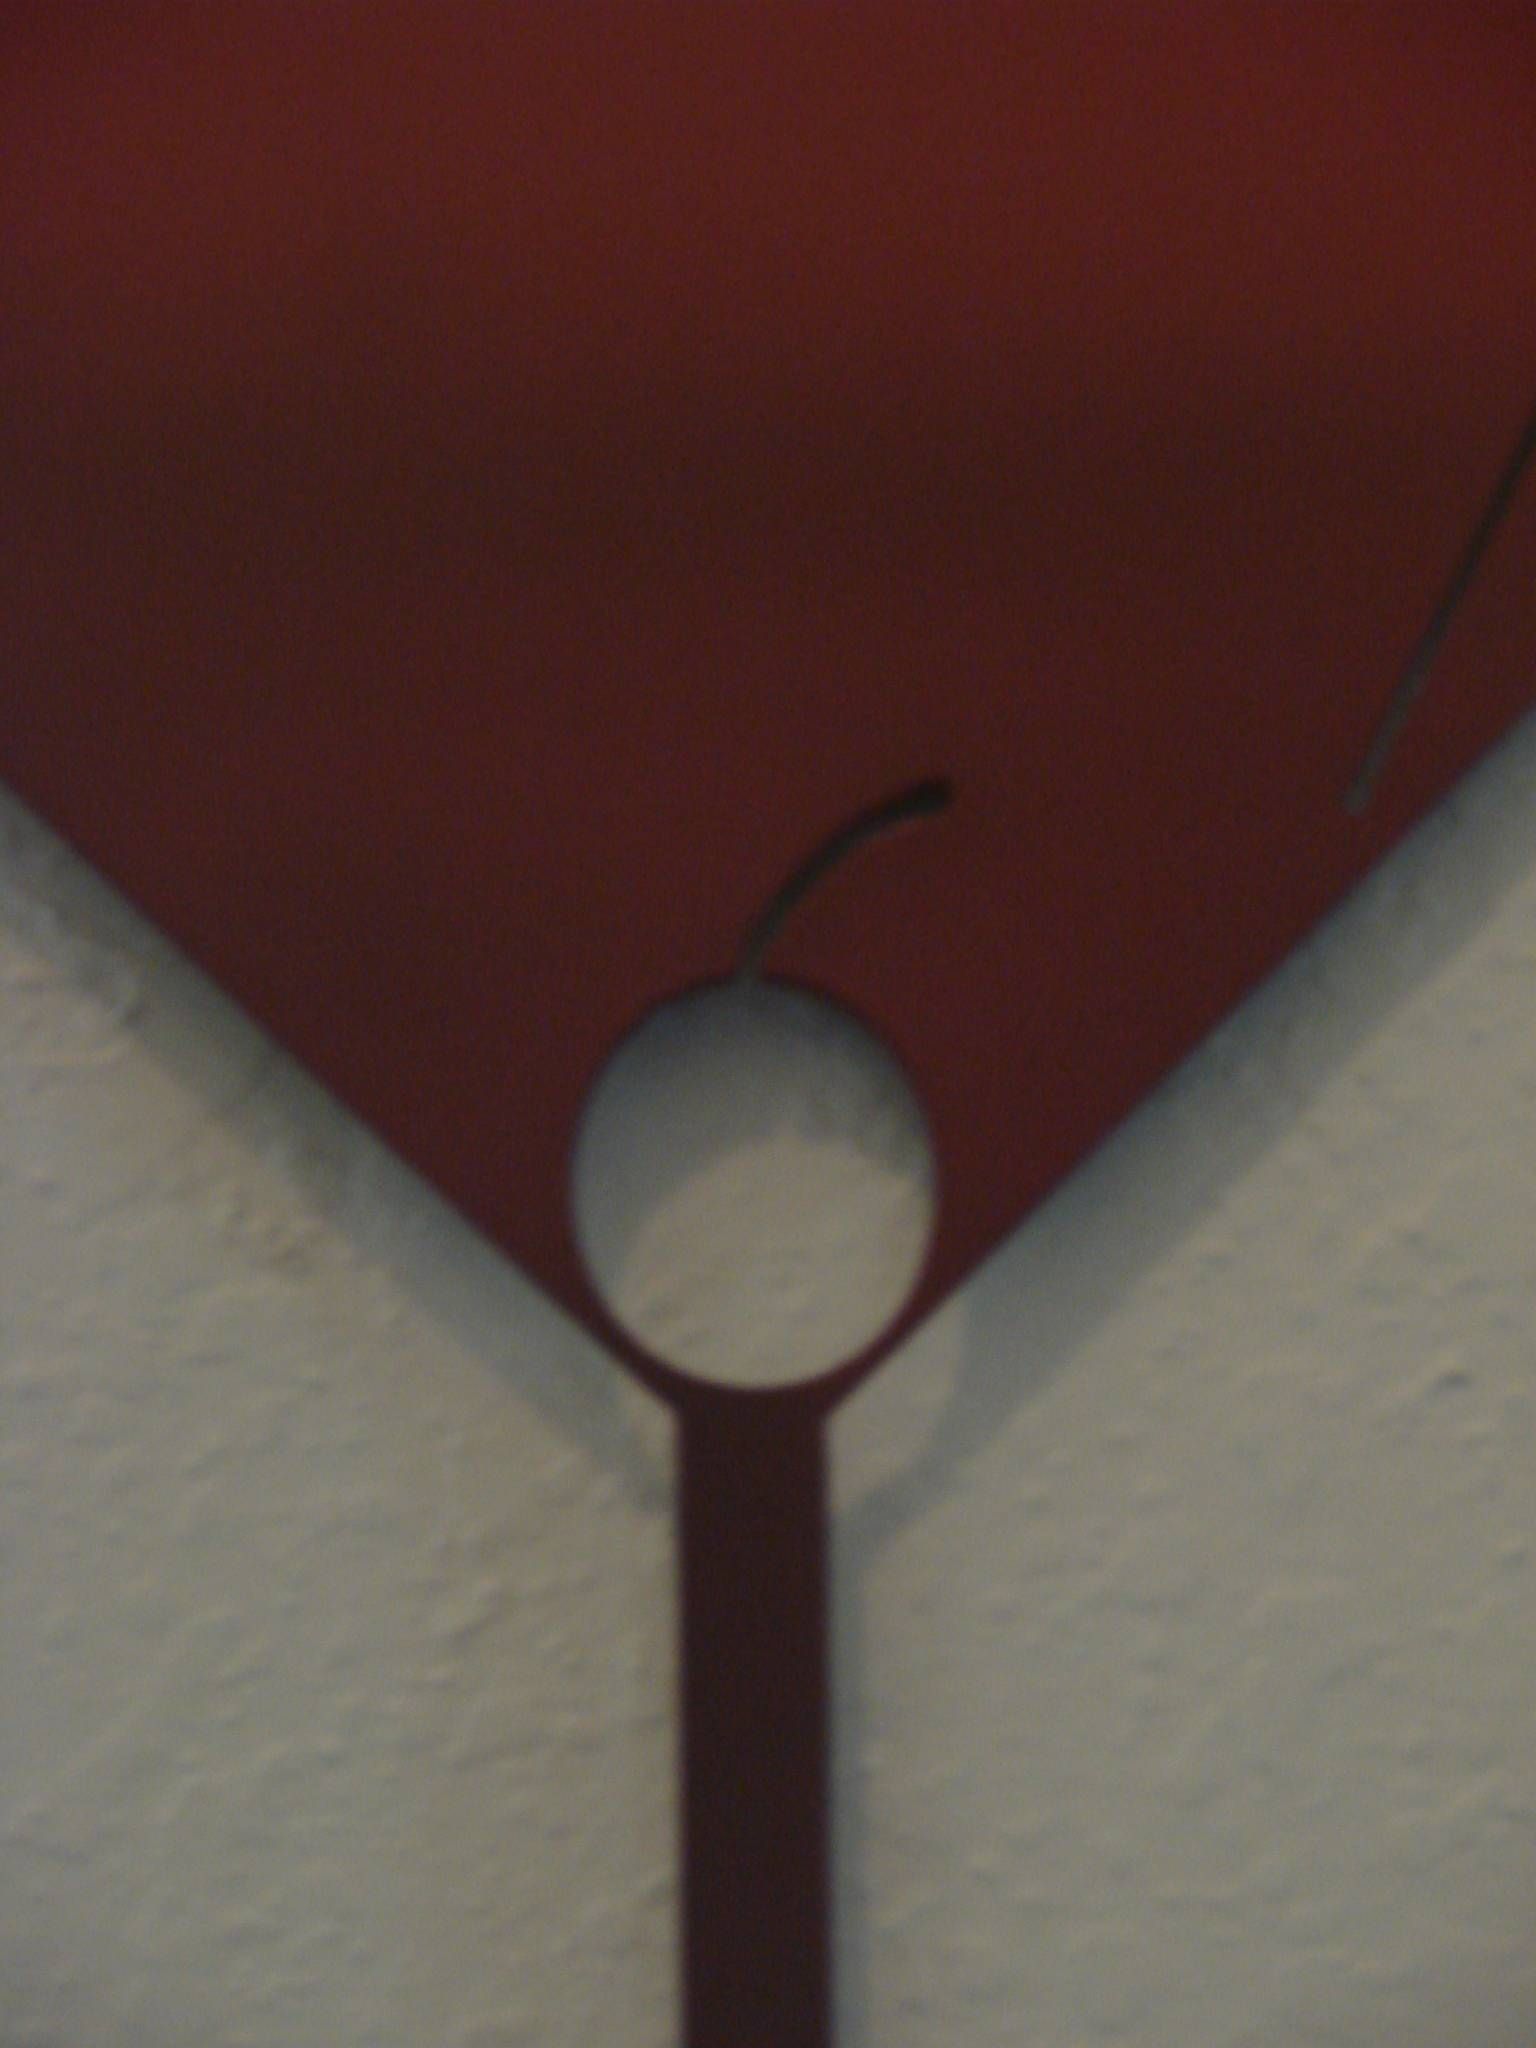 16 Gauge Ombre Red To Black Cosmopolitan Martini Glass Metal Wall Within Most Current Martini Metal Wall Art (View 19 of 30)